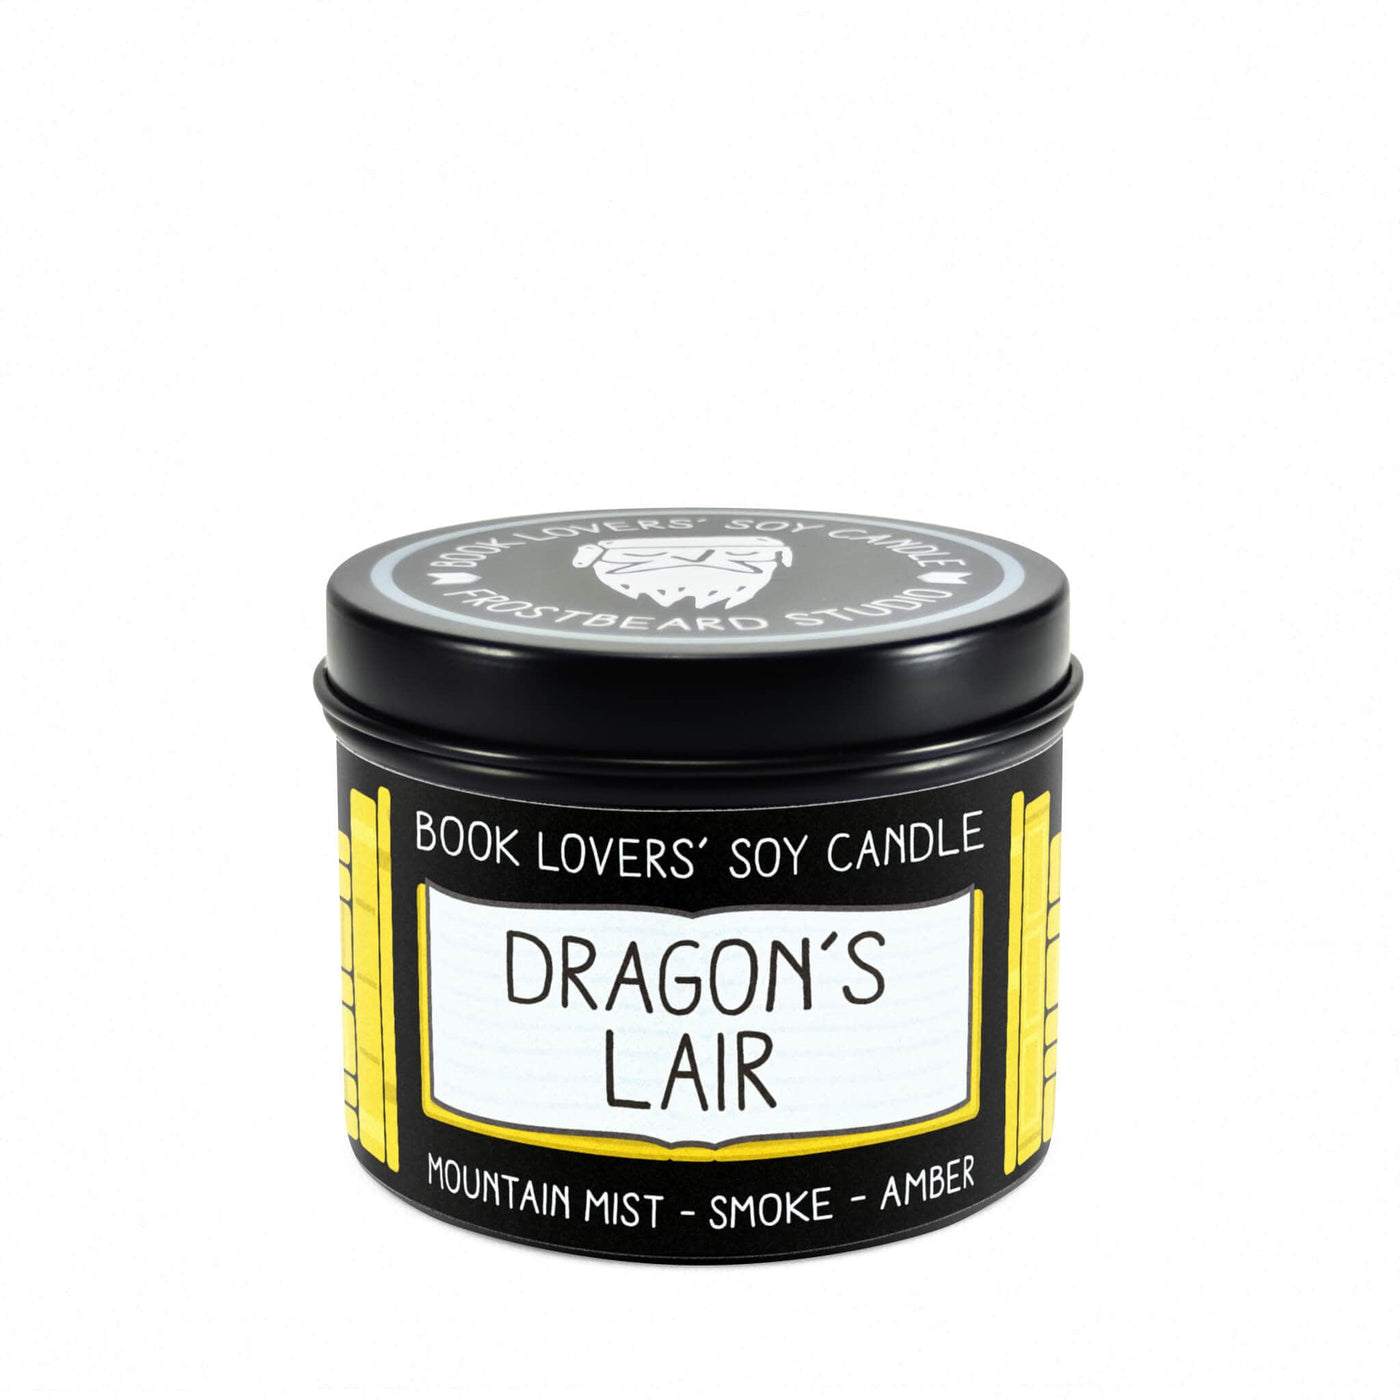 Dragon's Lair  -  4 oz Tin  -  Book Lovers' Soy Candle  -  Frostbeard Studio